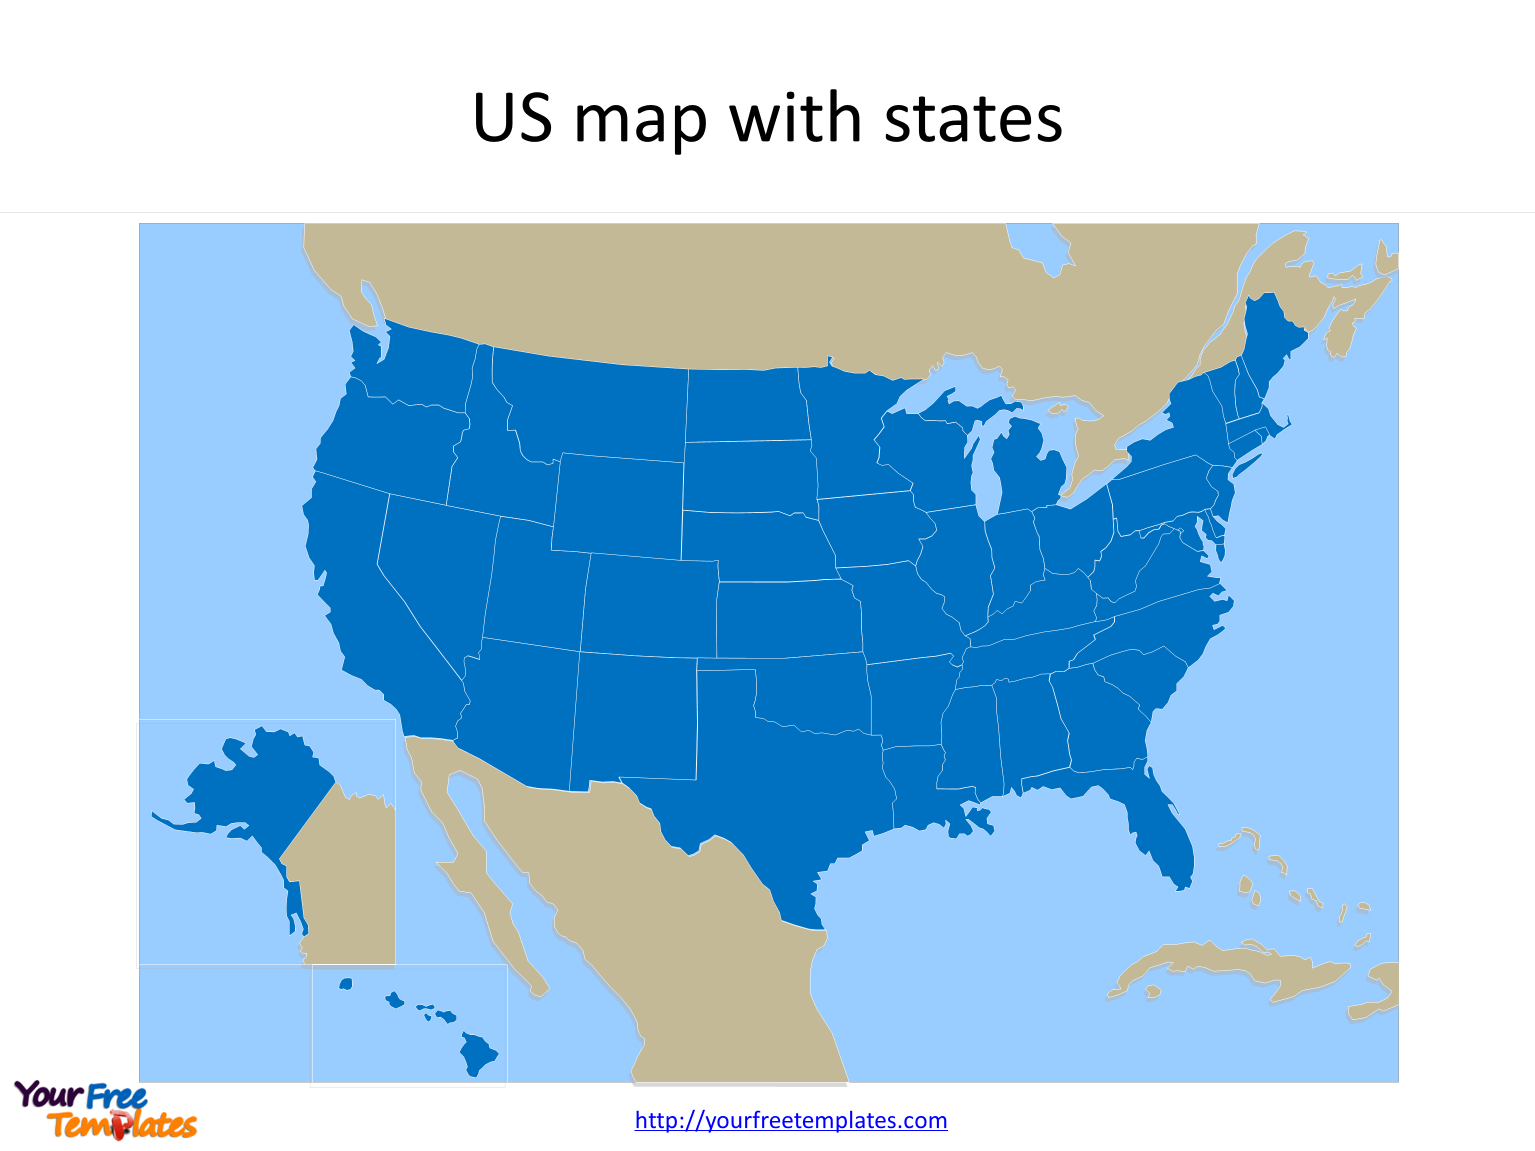 Free US map with states PowerPoint